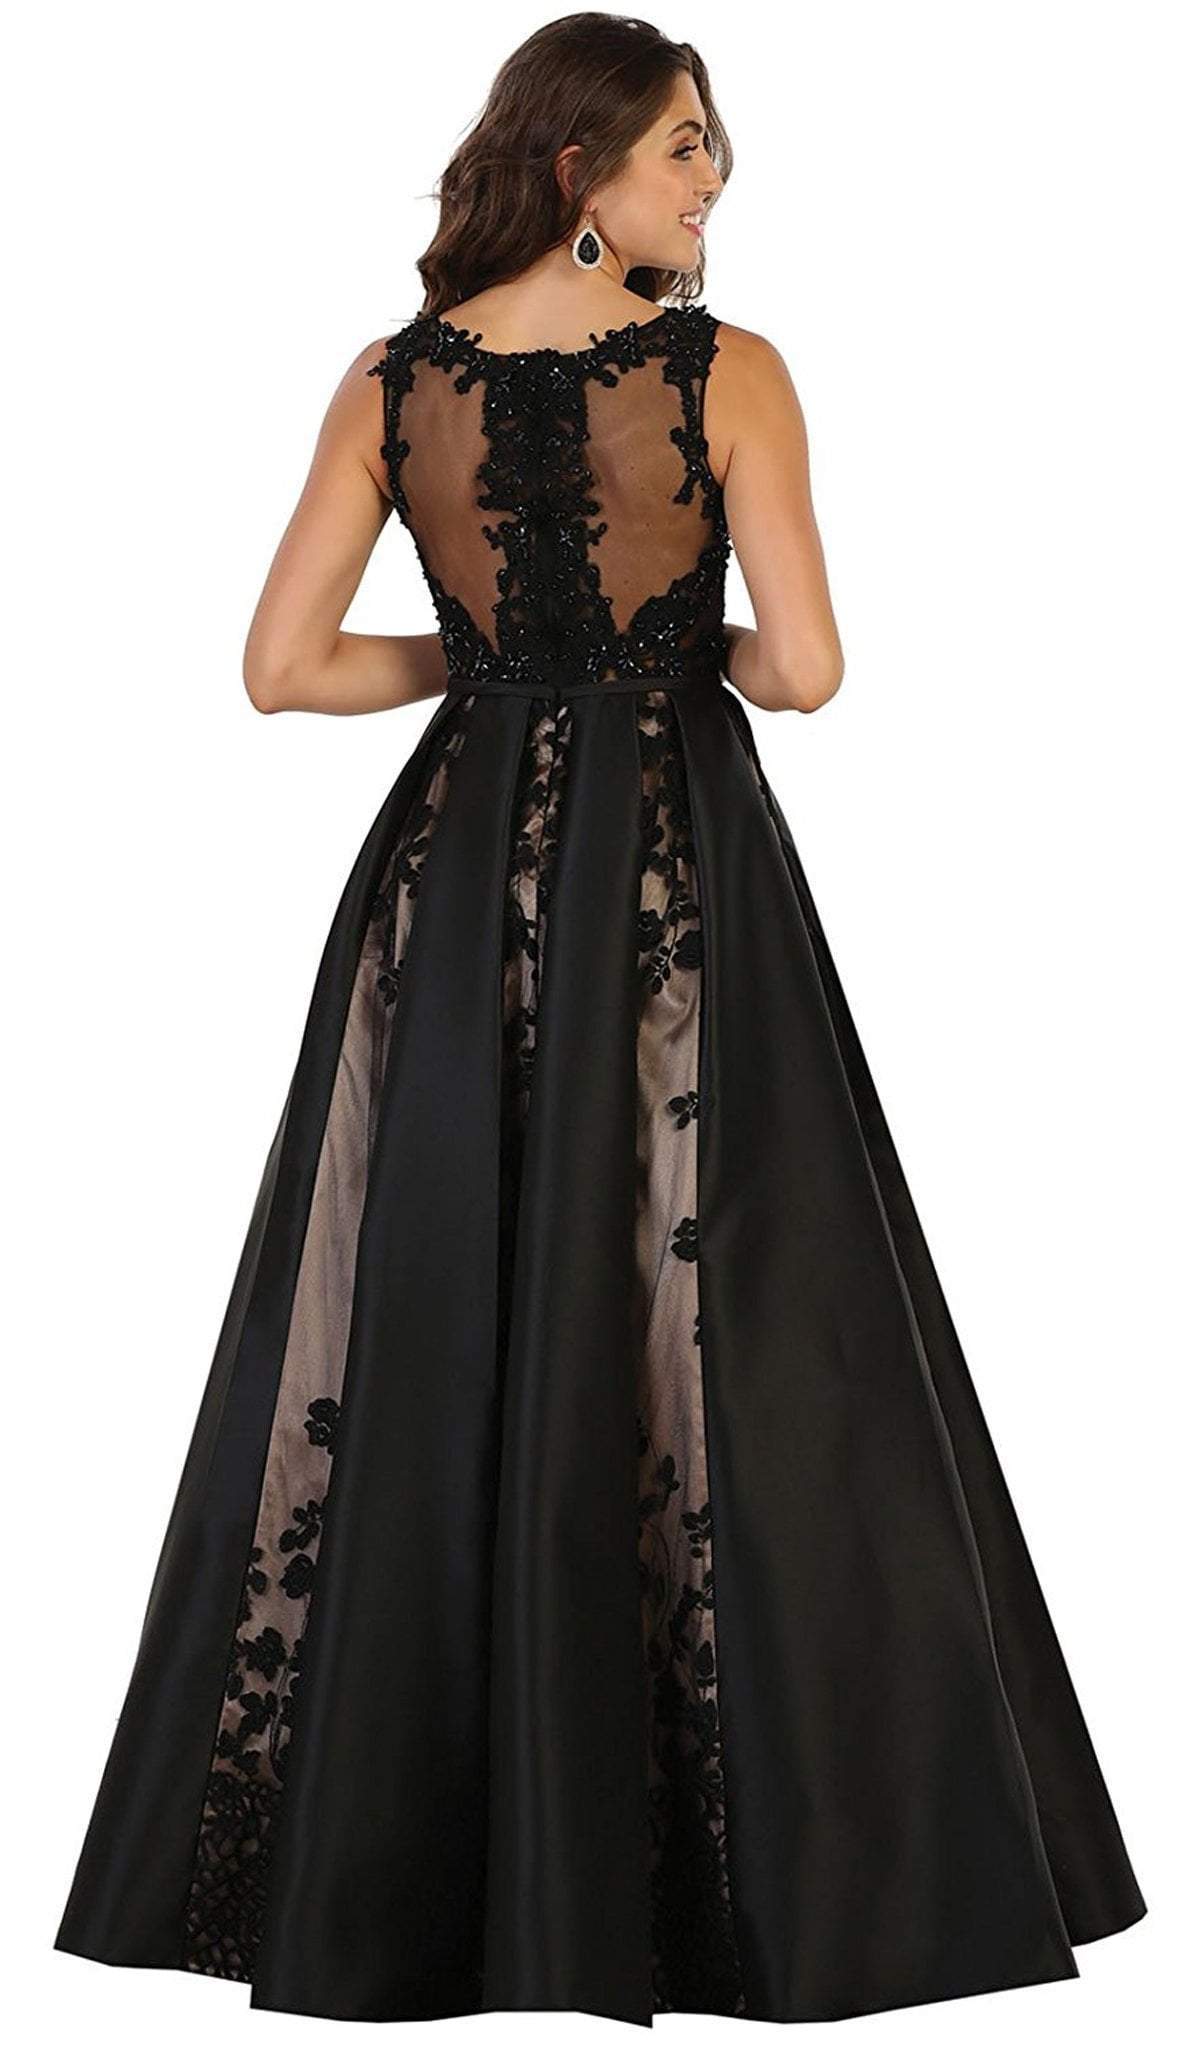 May Queen - Embroidered Sleeveless Mesh Satin Evening Gown Special Occasion Dress